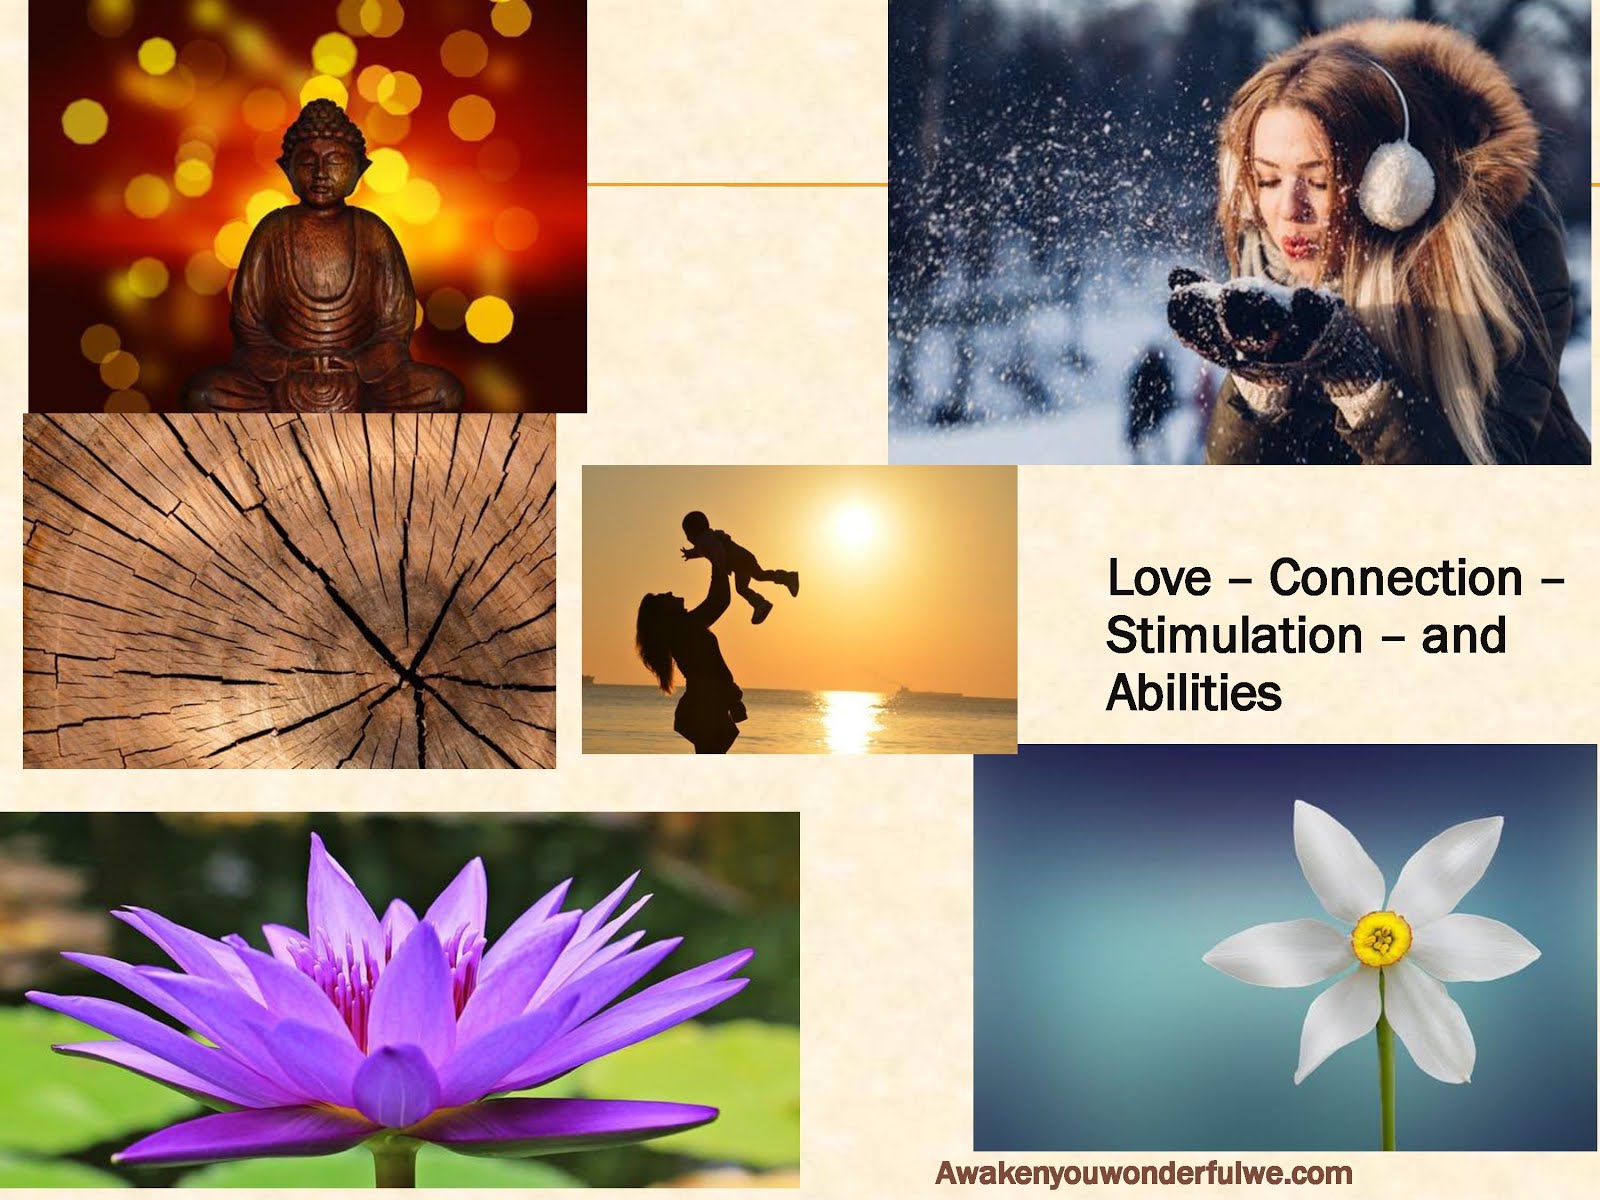 Love - Connection - Abilities and suitable challenging 3